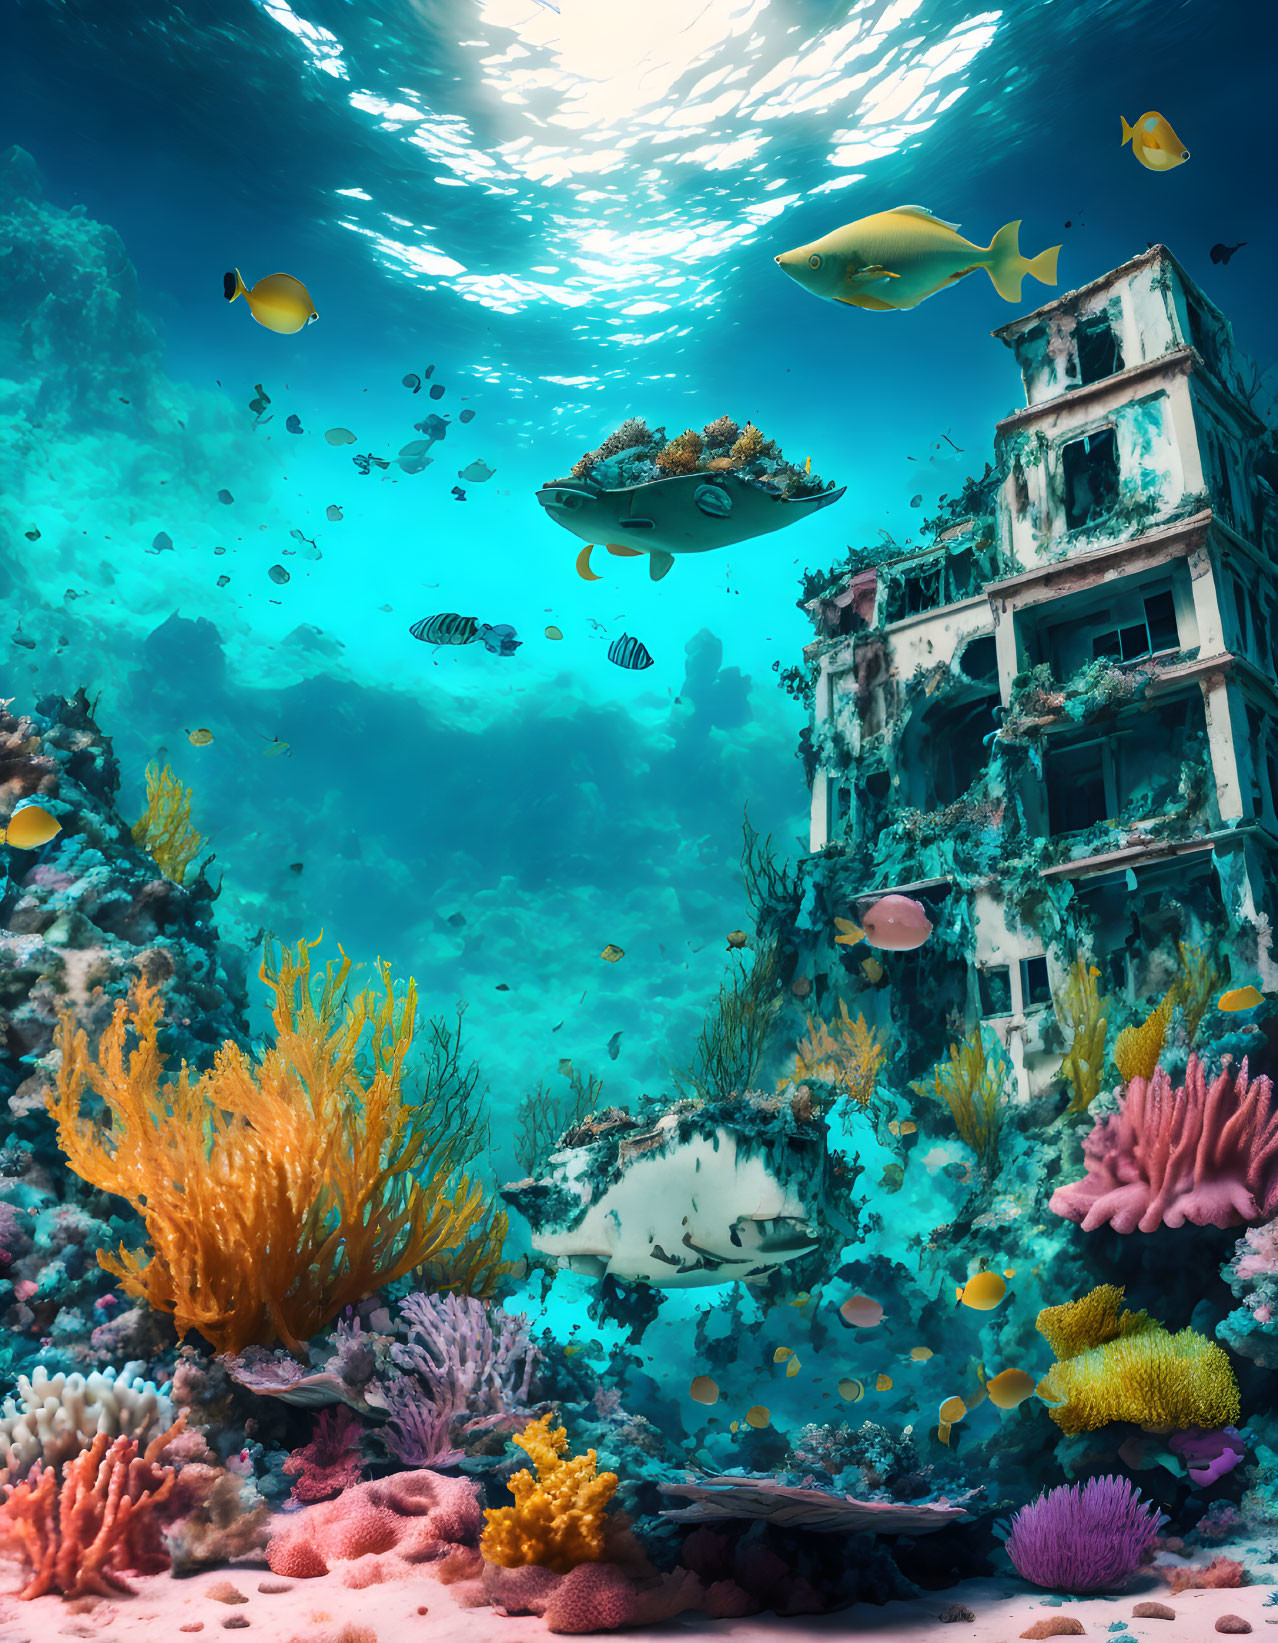 Sunken building amidst vibrant coral reefs and tropical fish in dappled sunlight